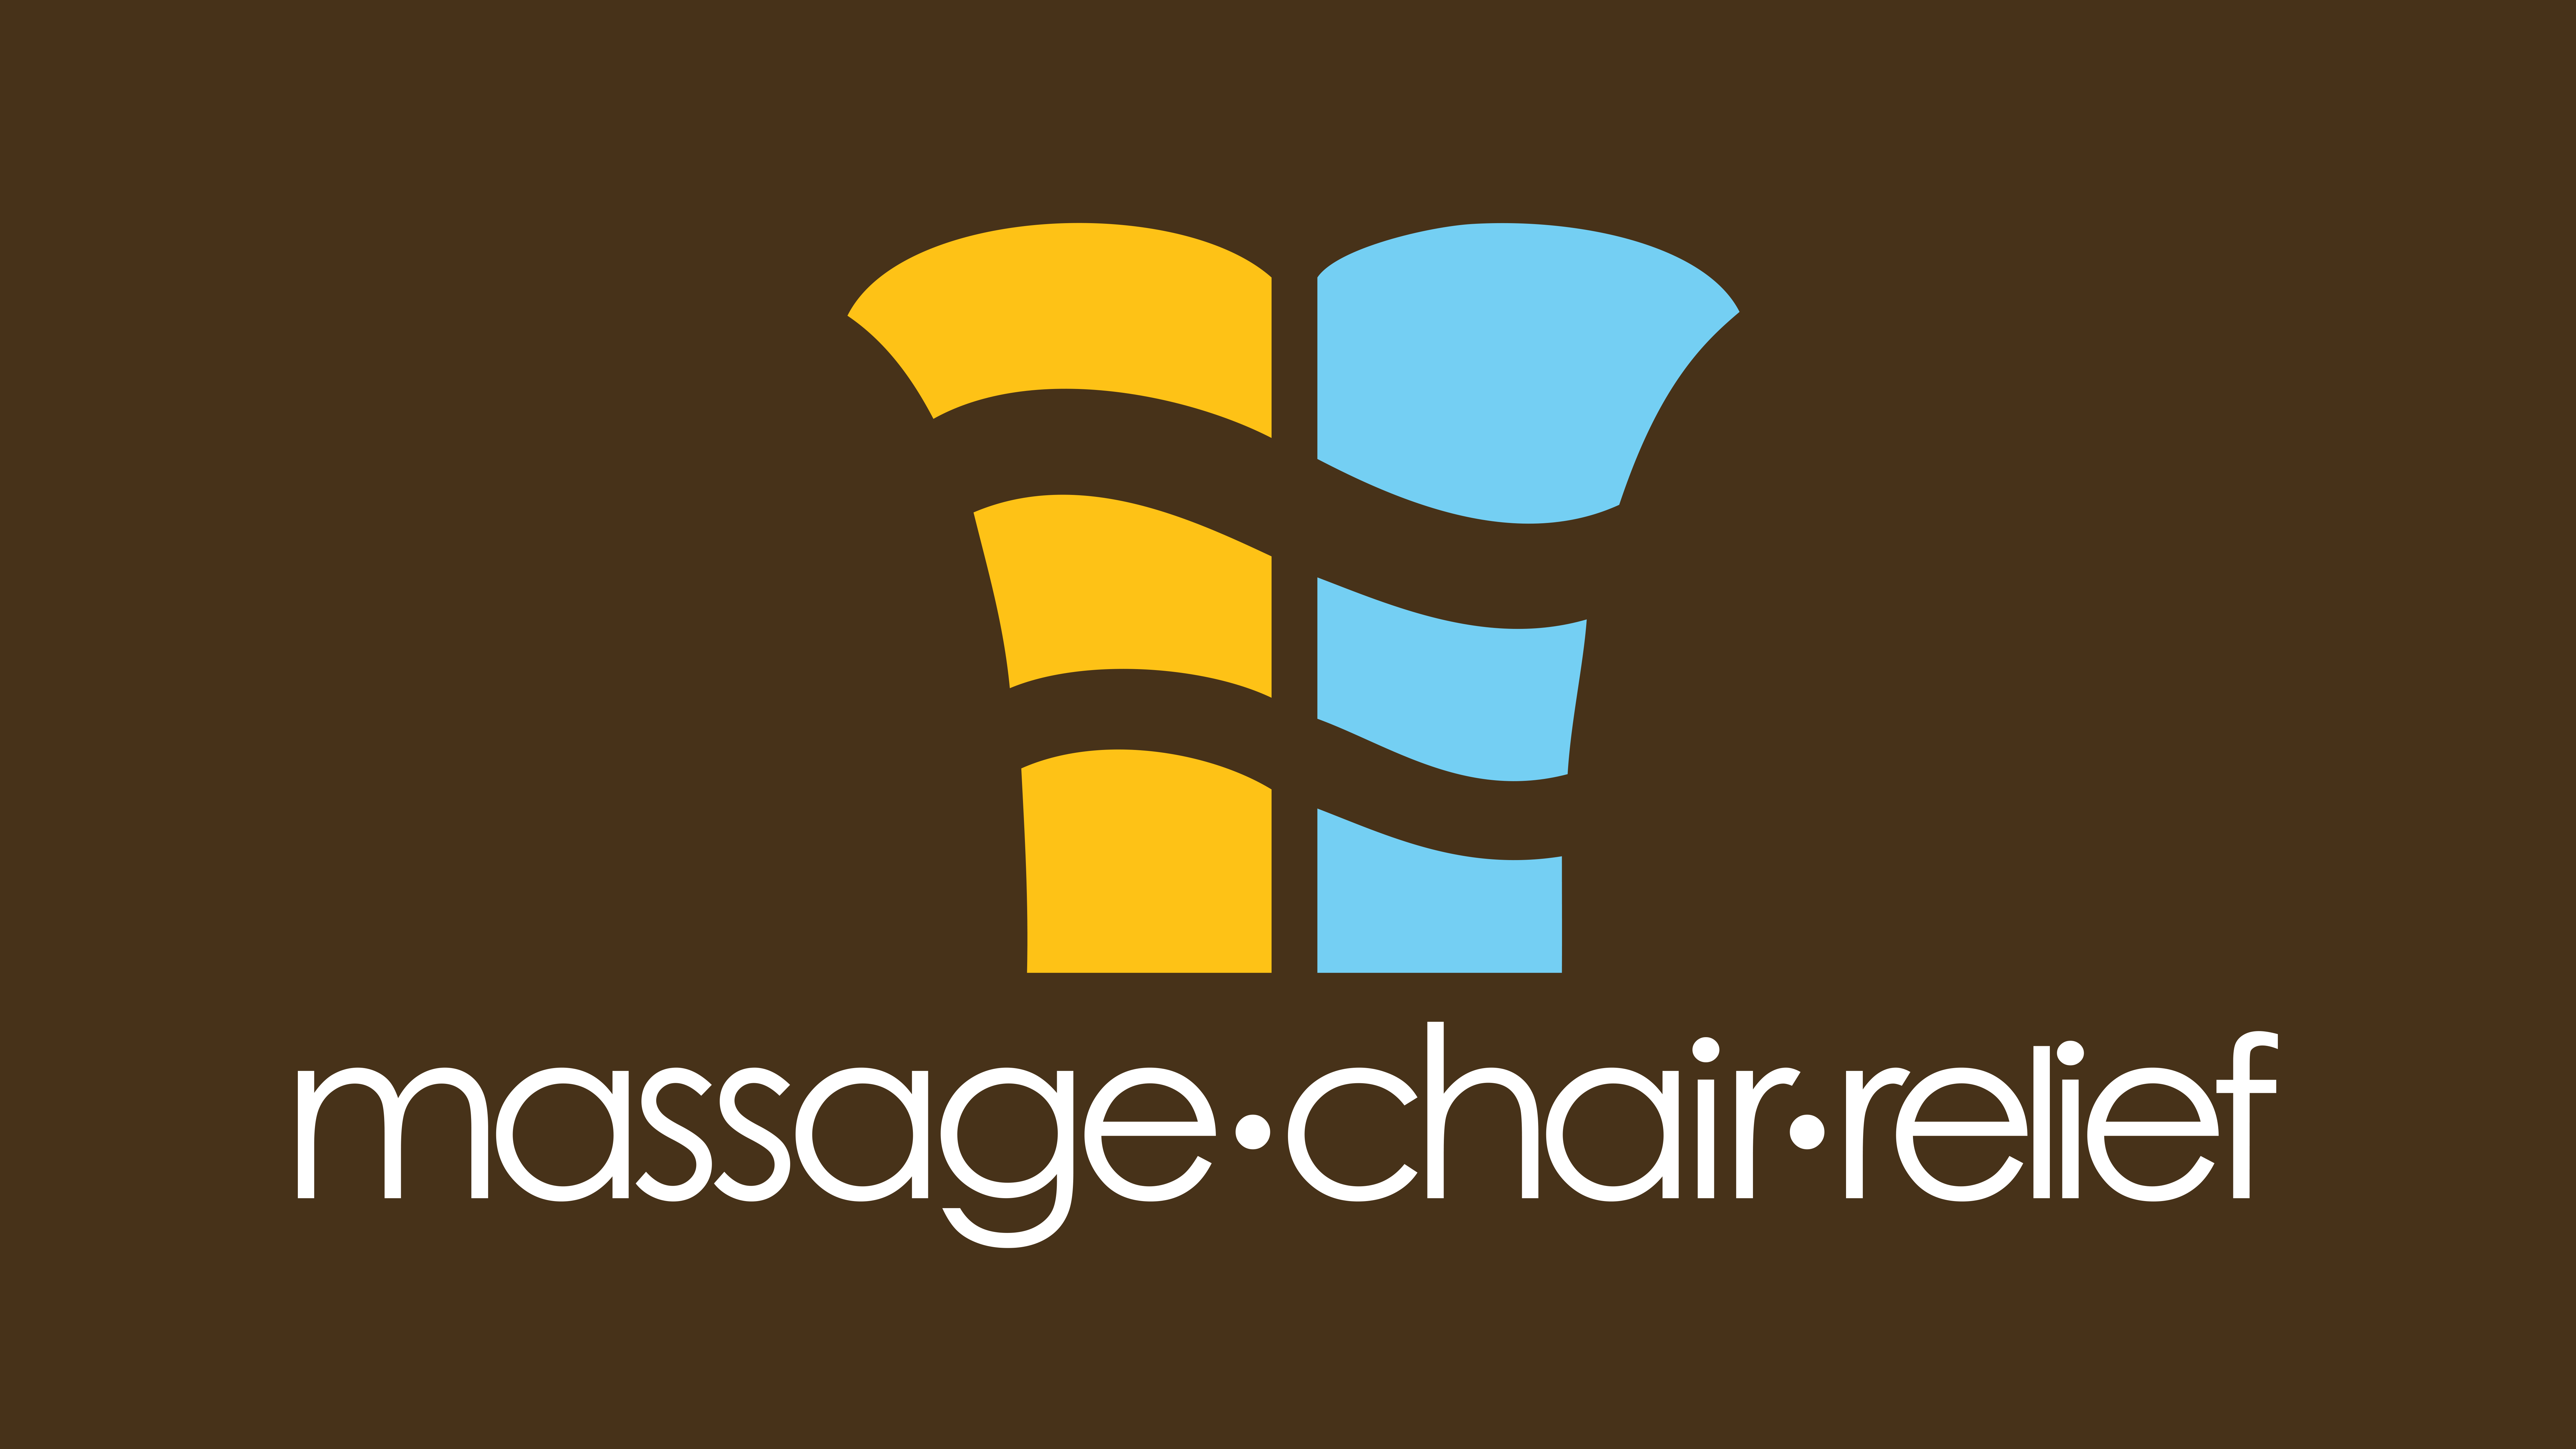 Massage Chair Relief Opens Retail Store in Mesa, Arizona with Top Brands and Latest Massage Chair Models